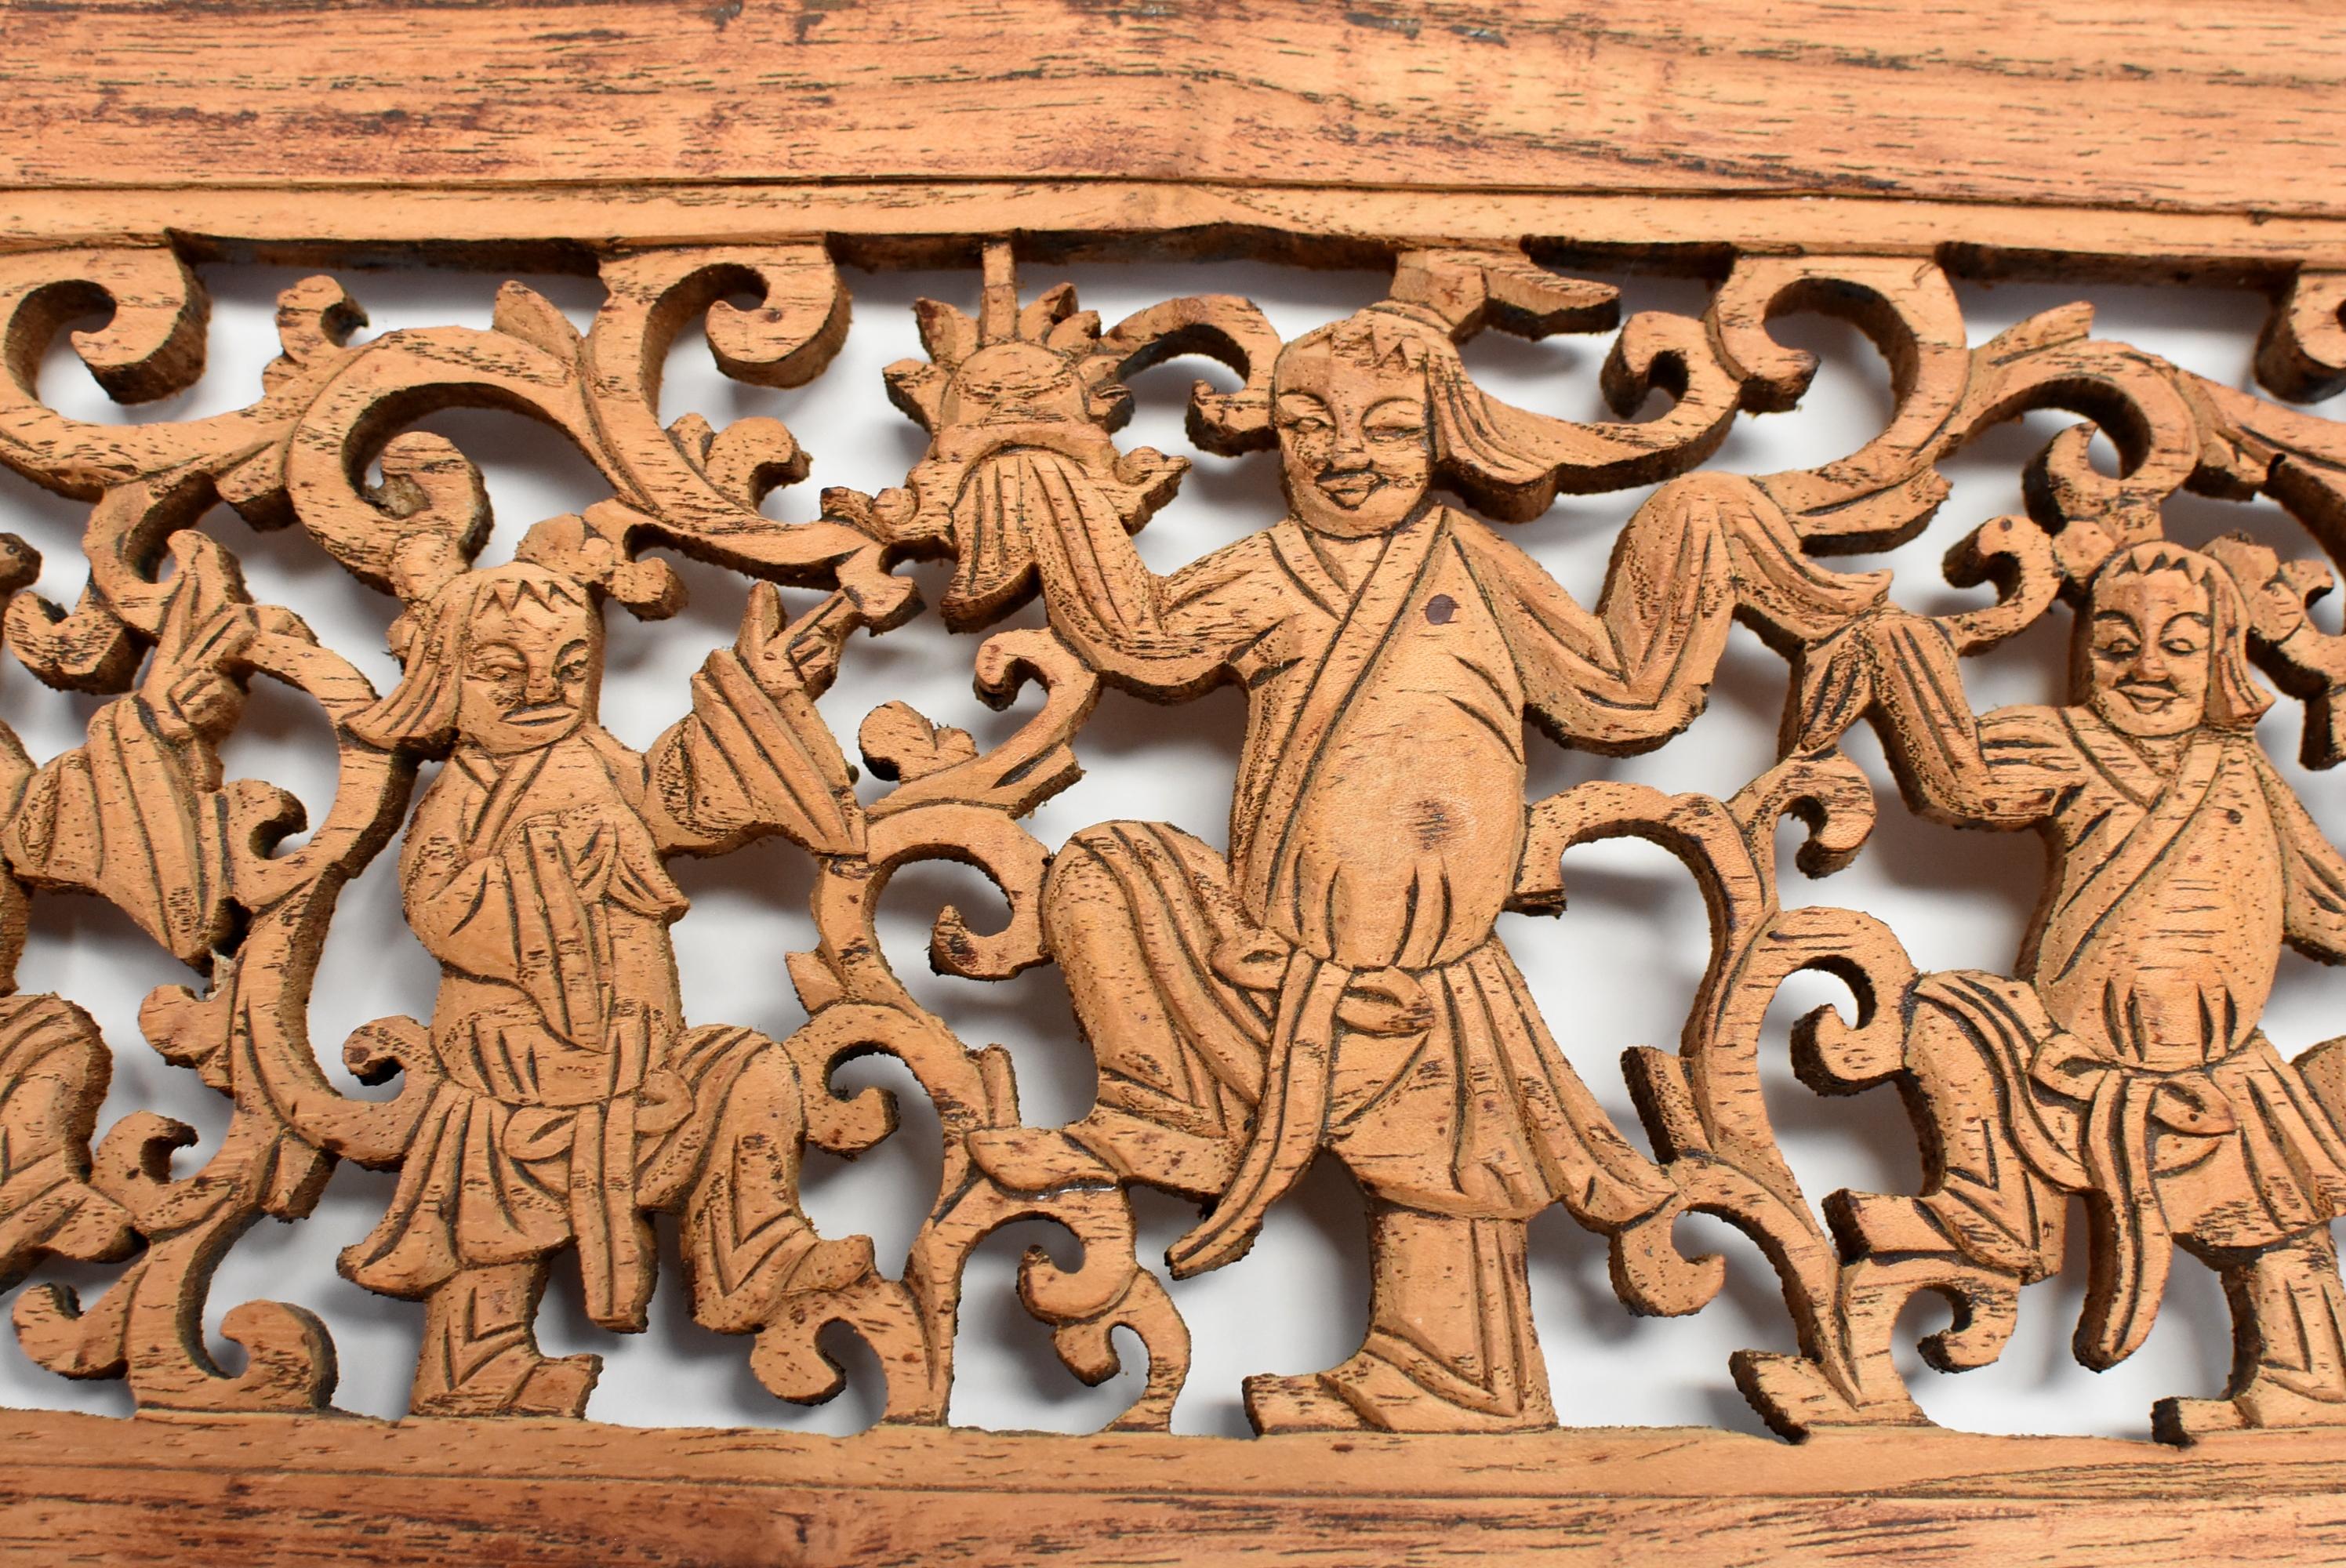 A wonderful 19th century wood carving featuring five men in a tribal dance. Pierced carving adds airiness. Continuous scrolls match the festivity theme. Vivid expressions.